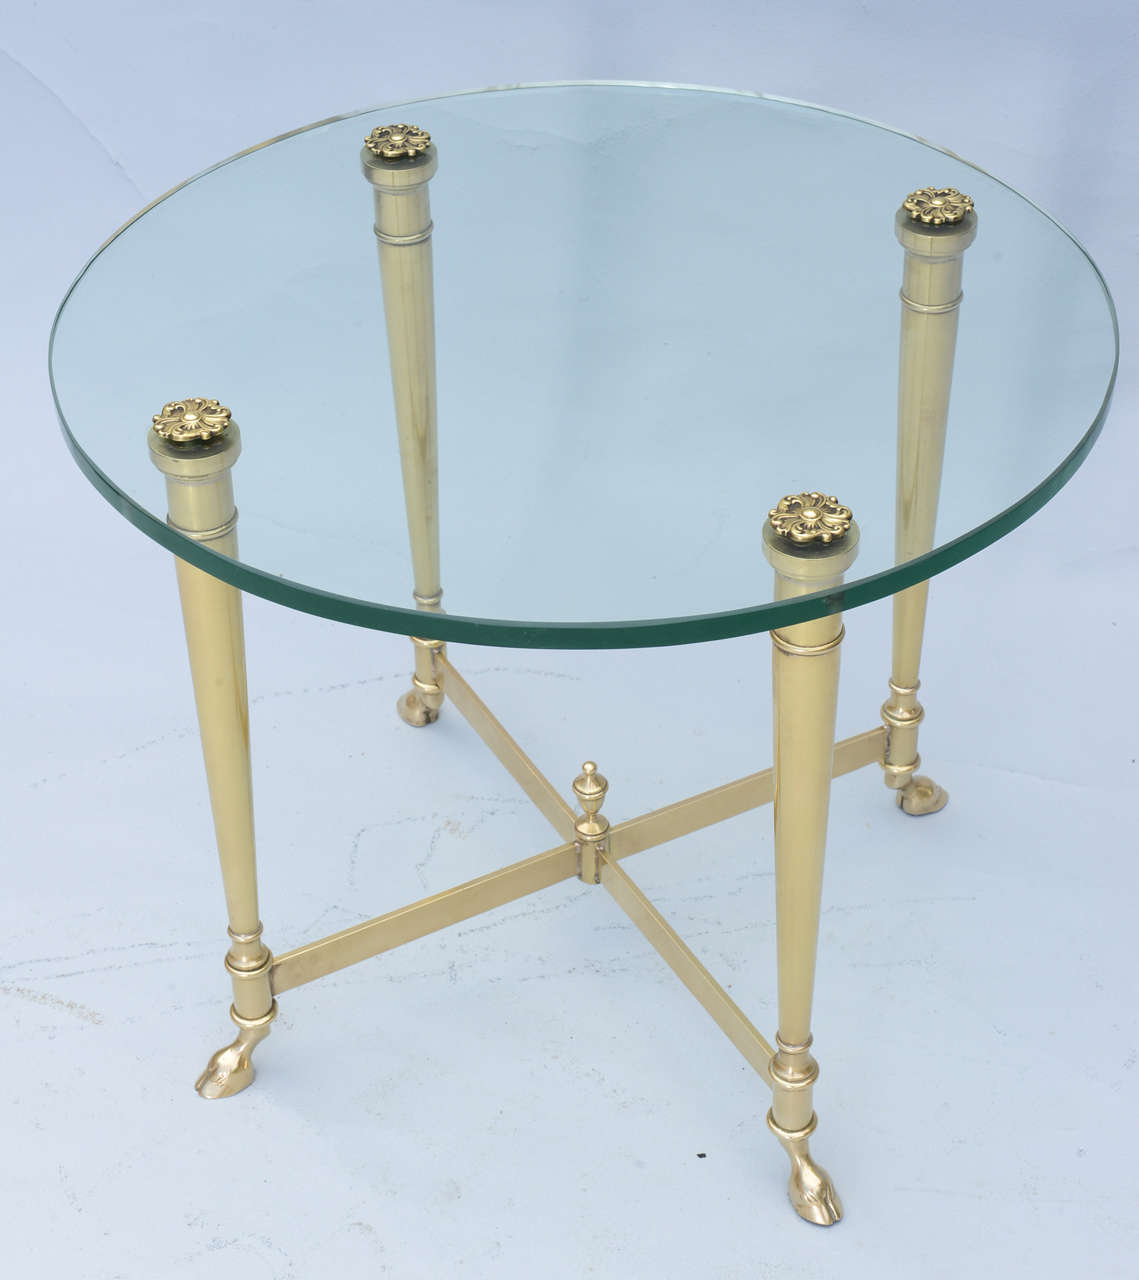 brass table with glass top